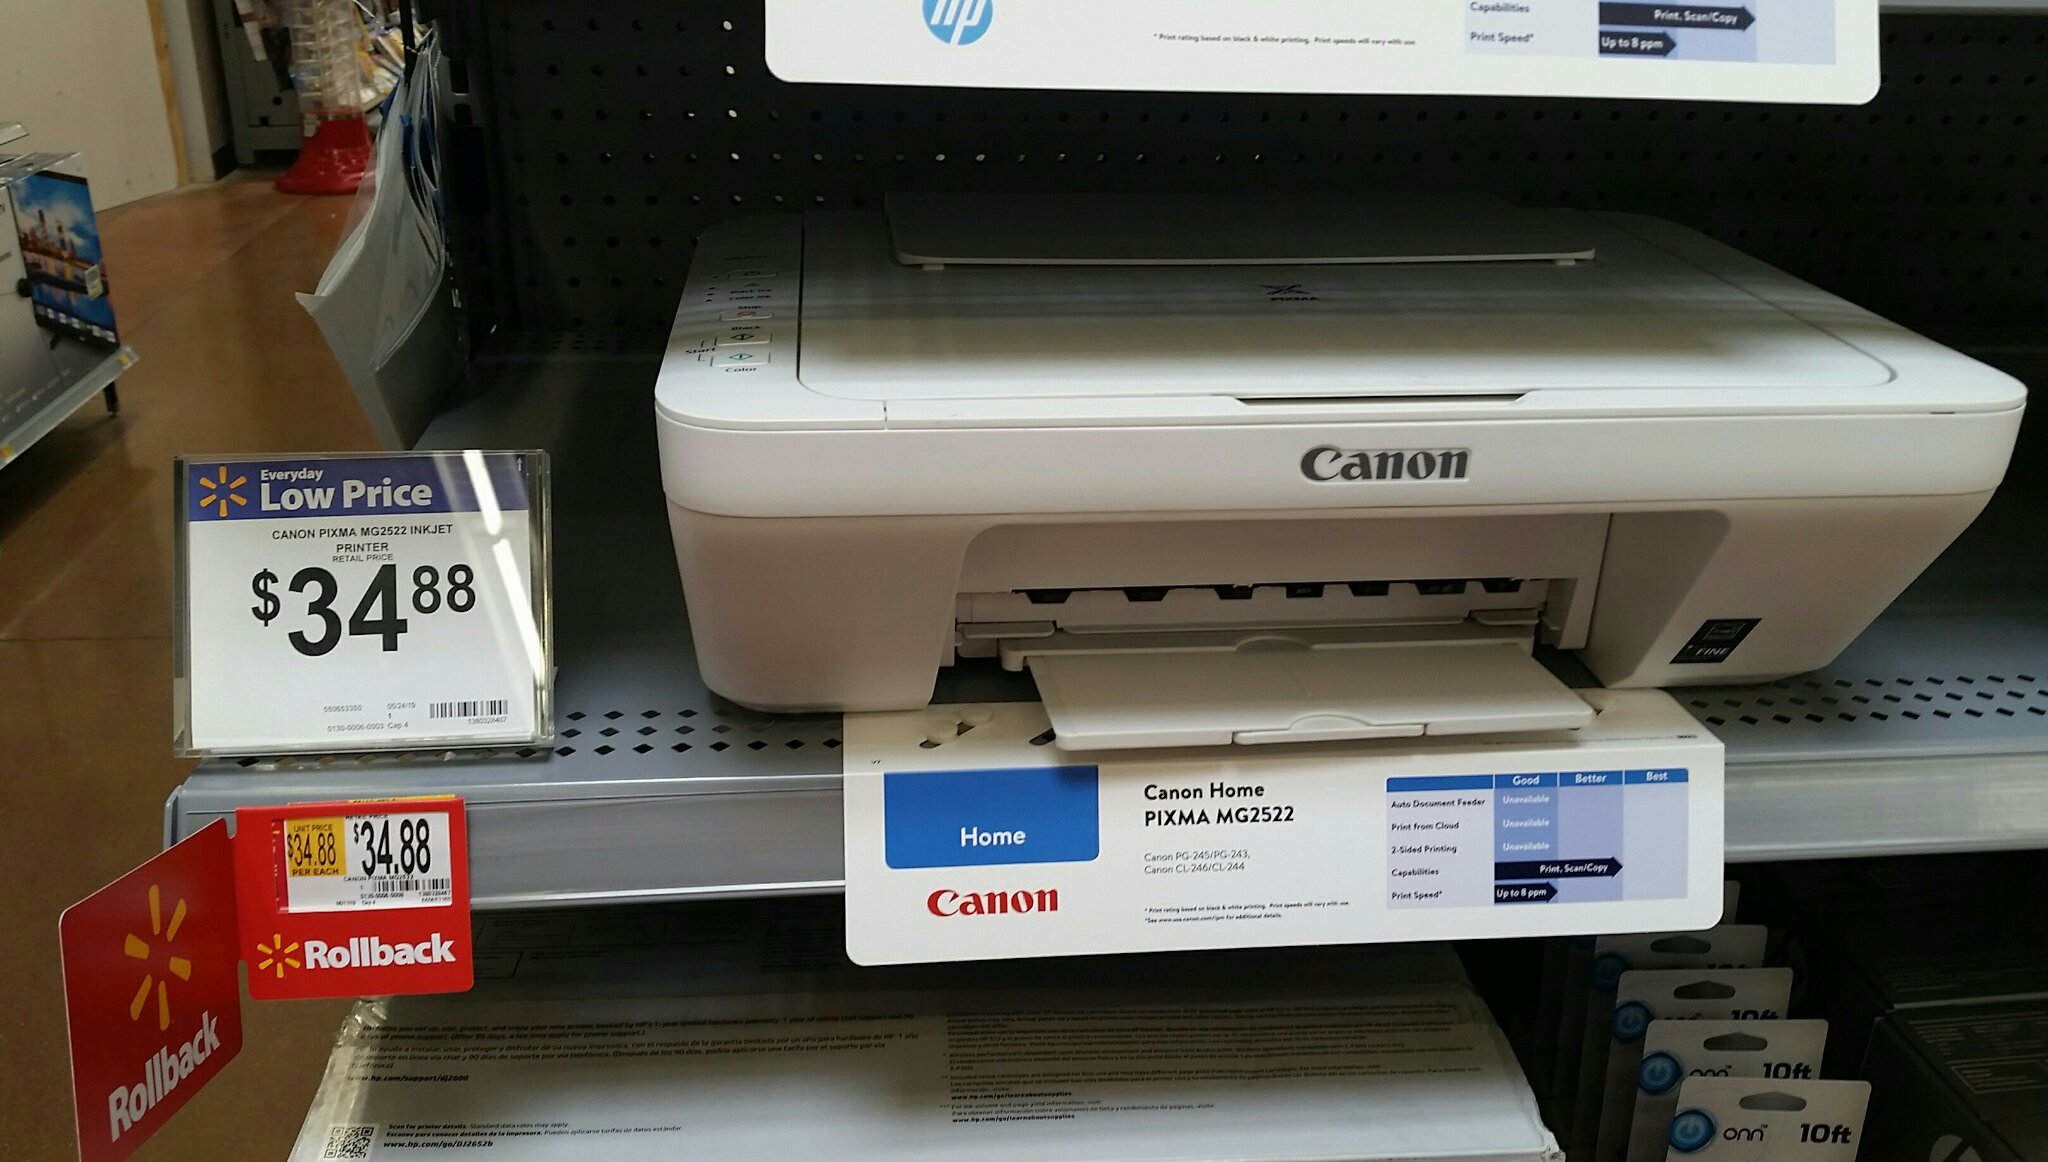 Ink costs 50 bucks and this printer comes with ink. Hmmm.... - meme